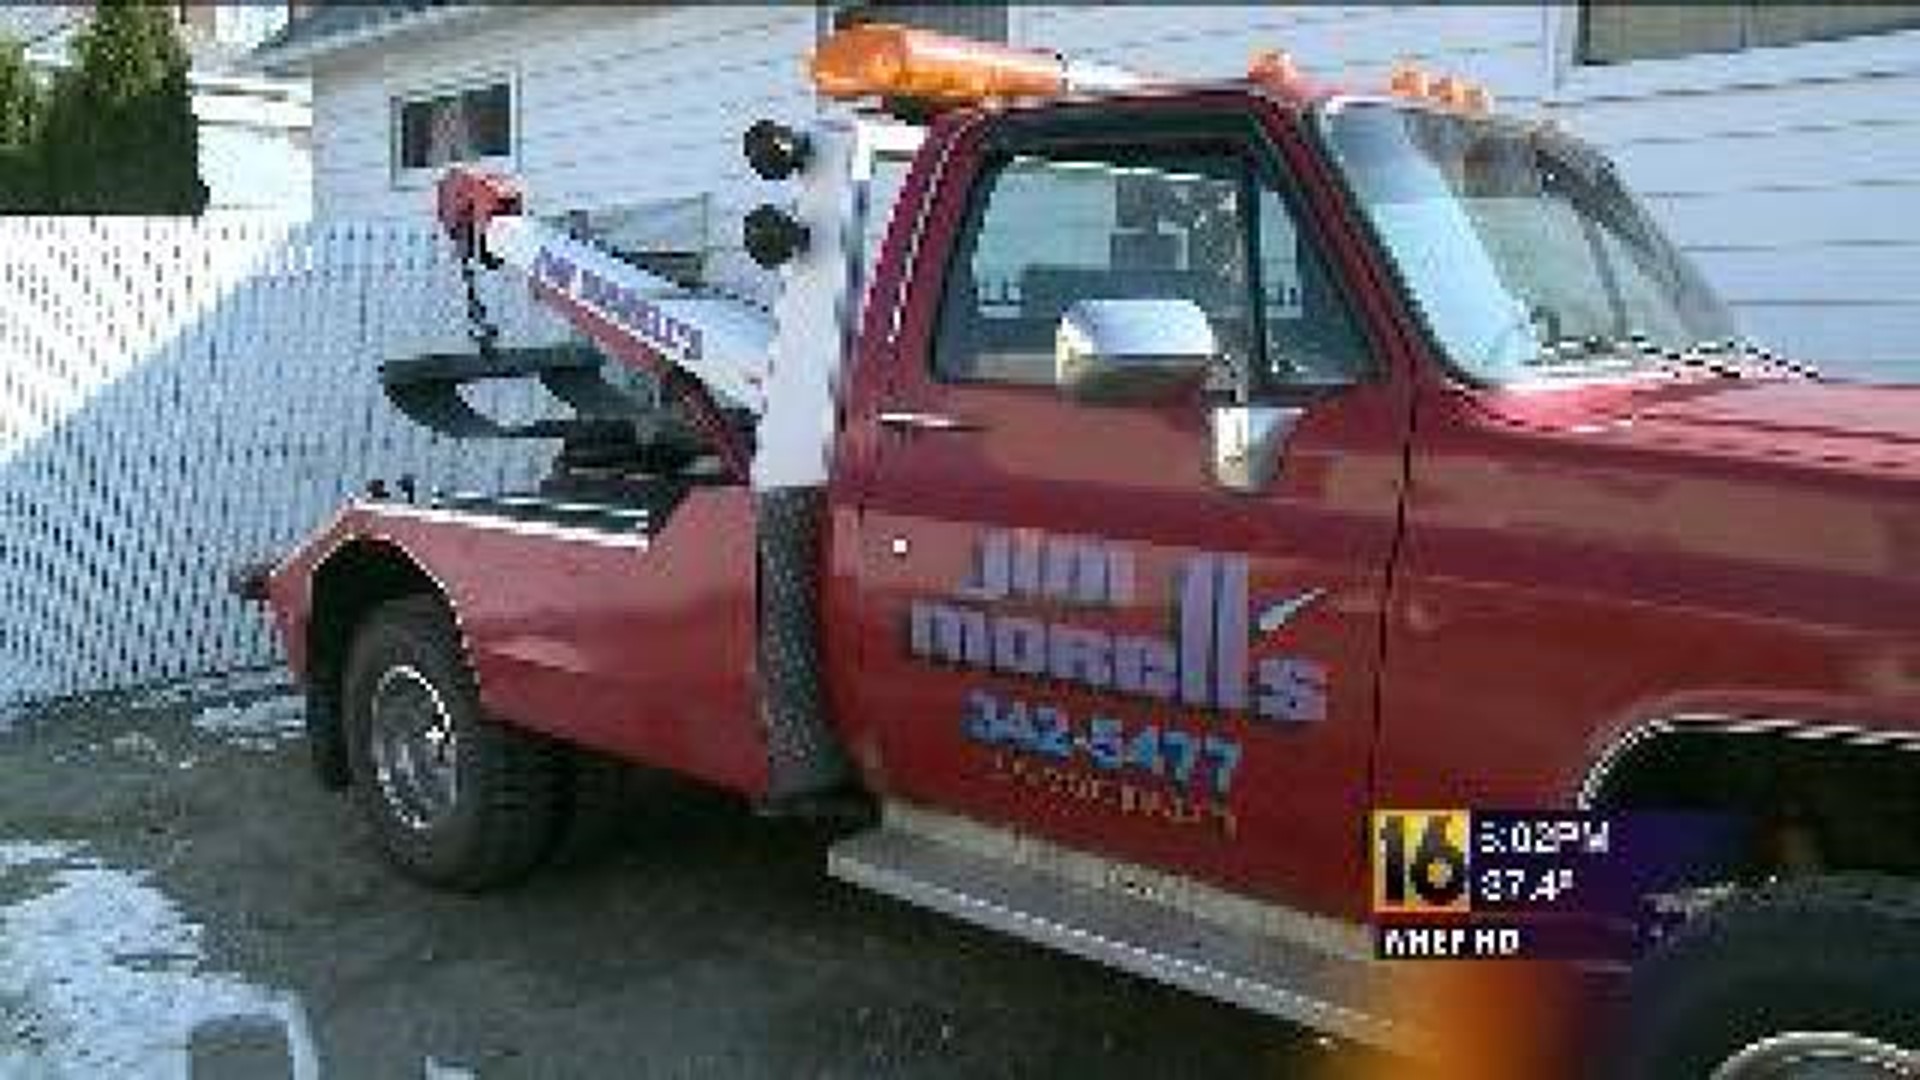 Tow Truck Operators to Cough up More Cash?